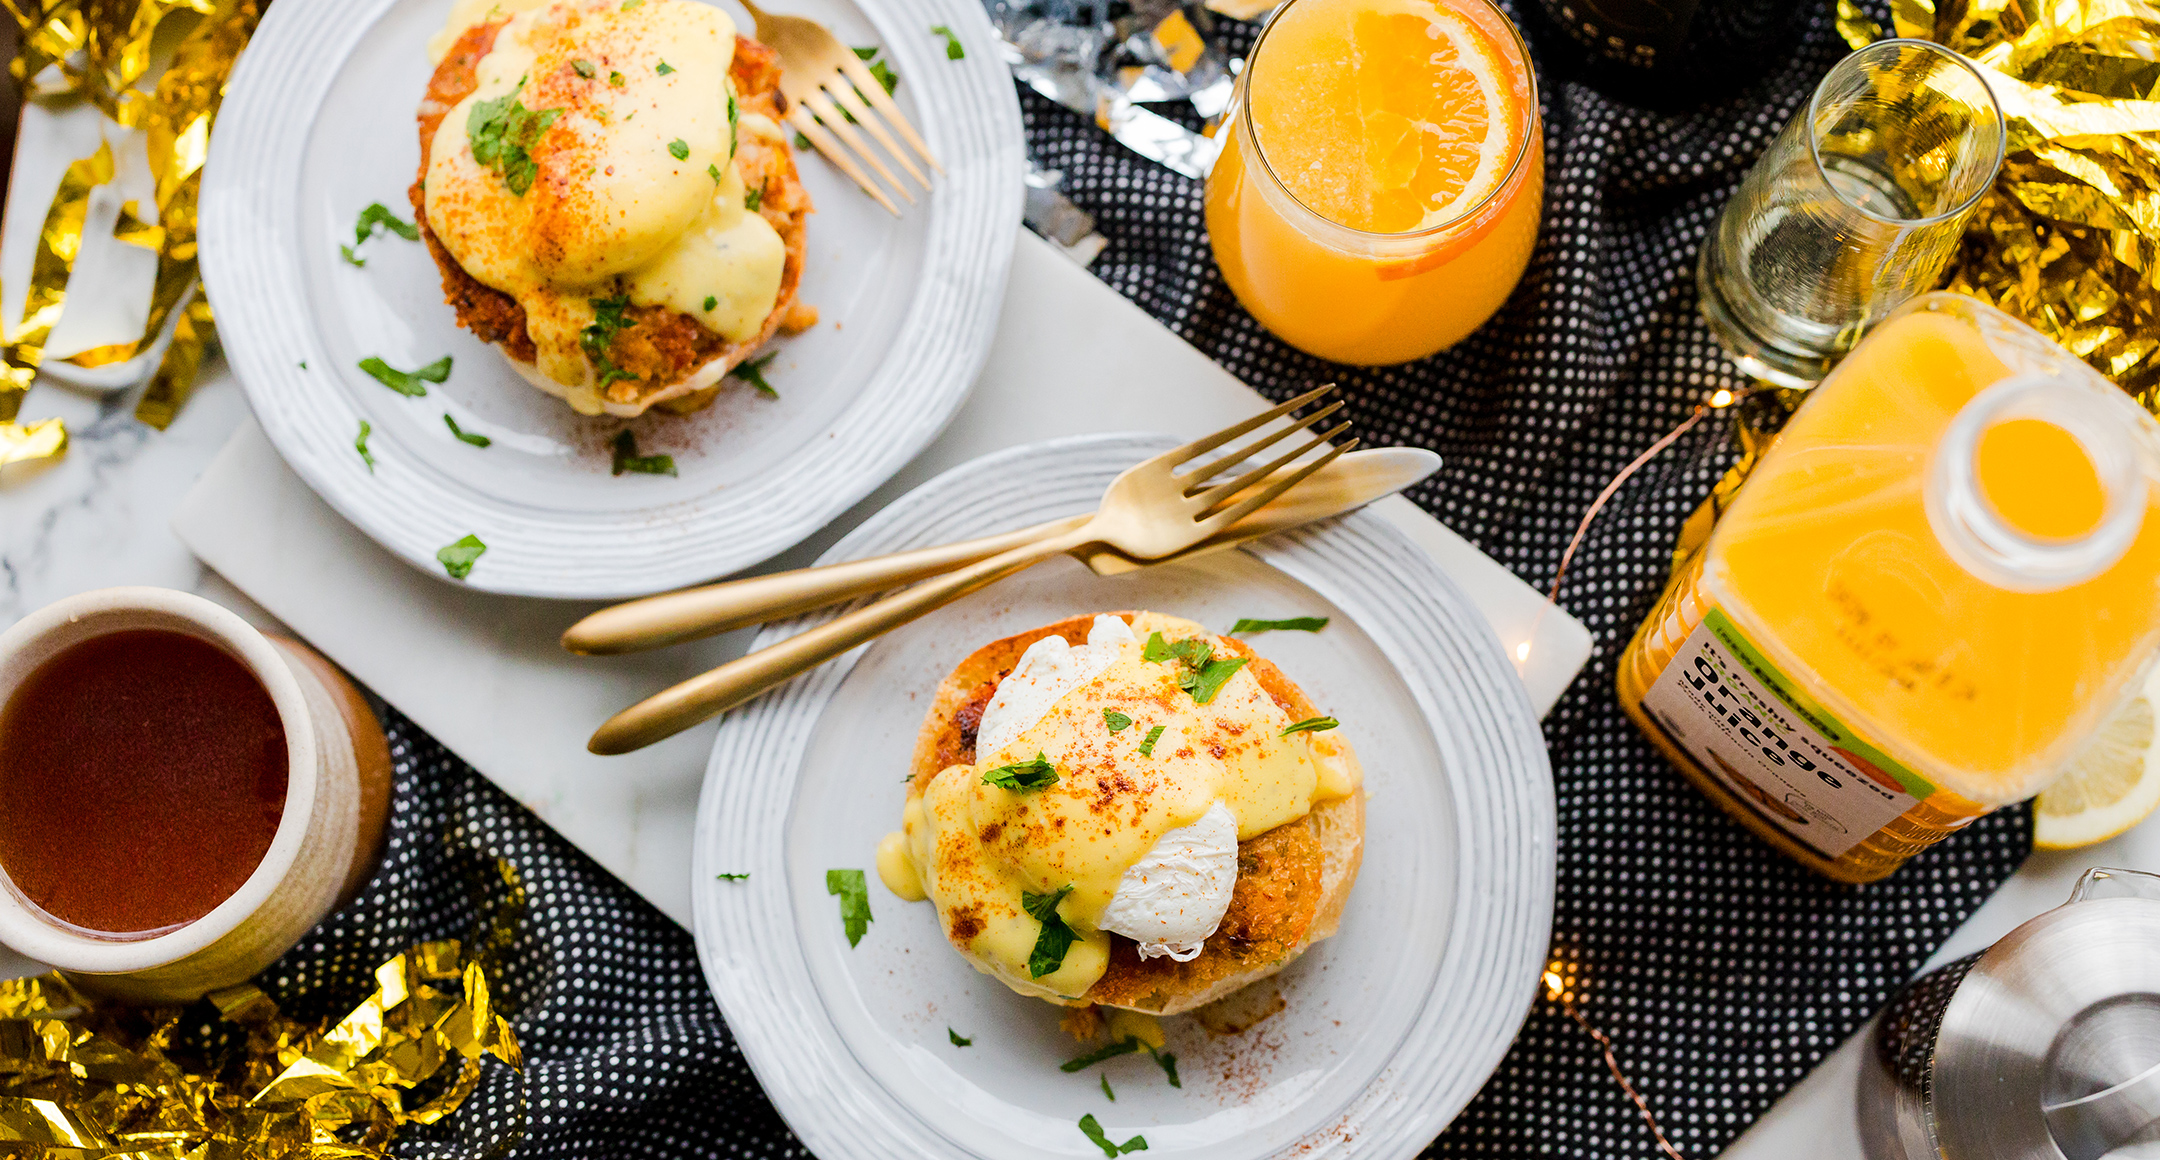 A plate topped with crab eggs Benedict slathered in Hollandaise sauce and a glass filled with mimosa on the side.